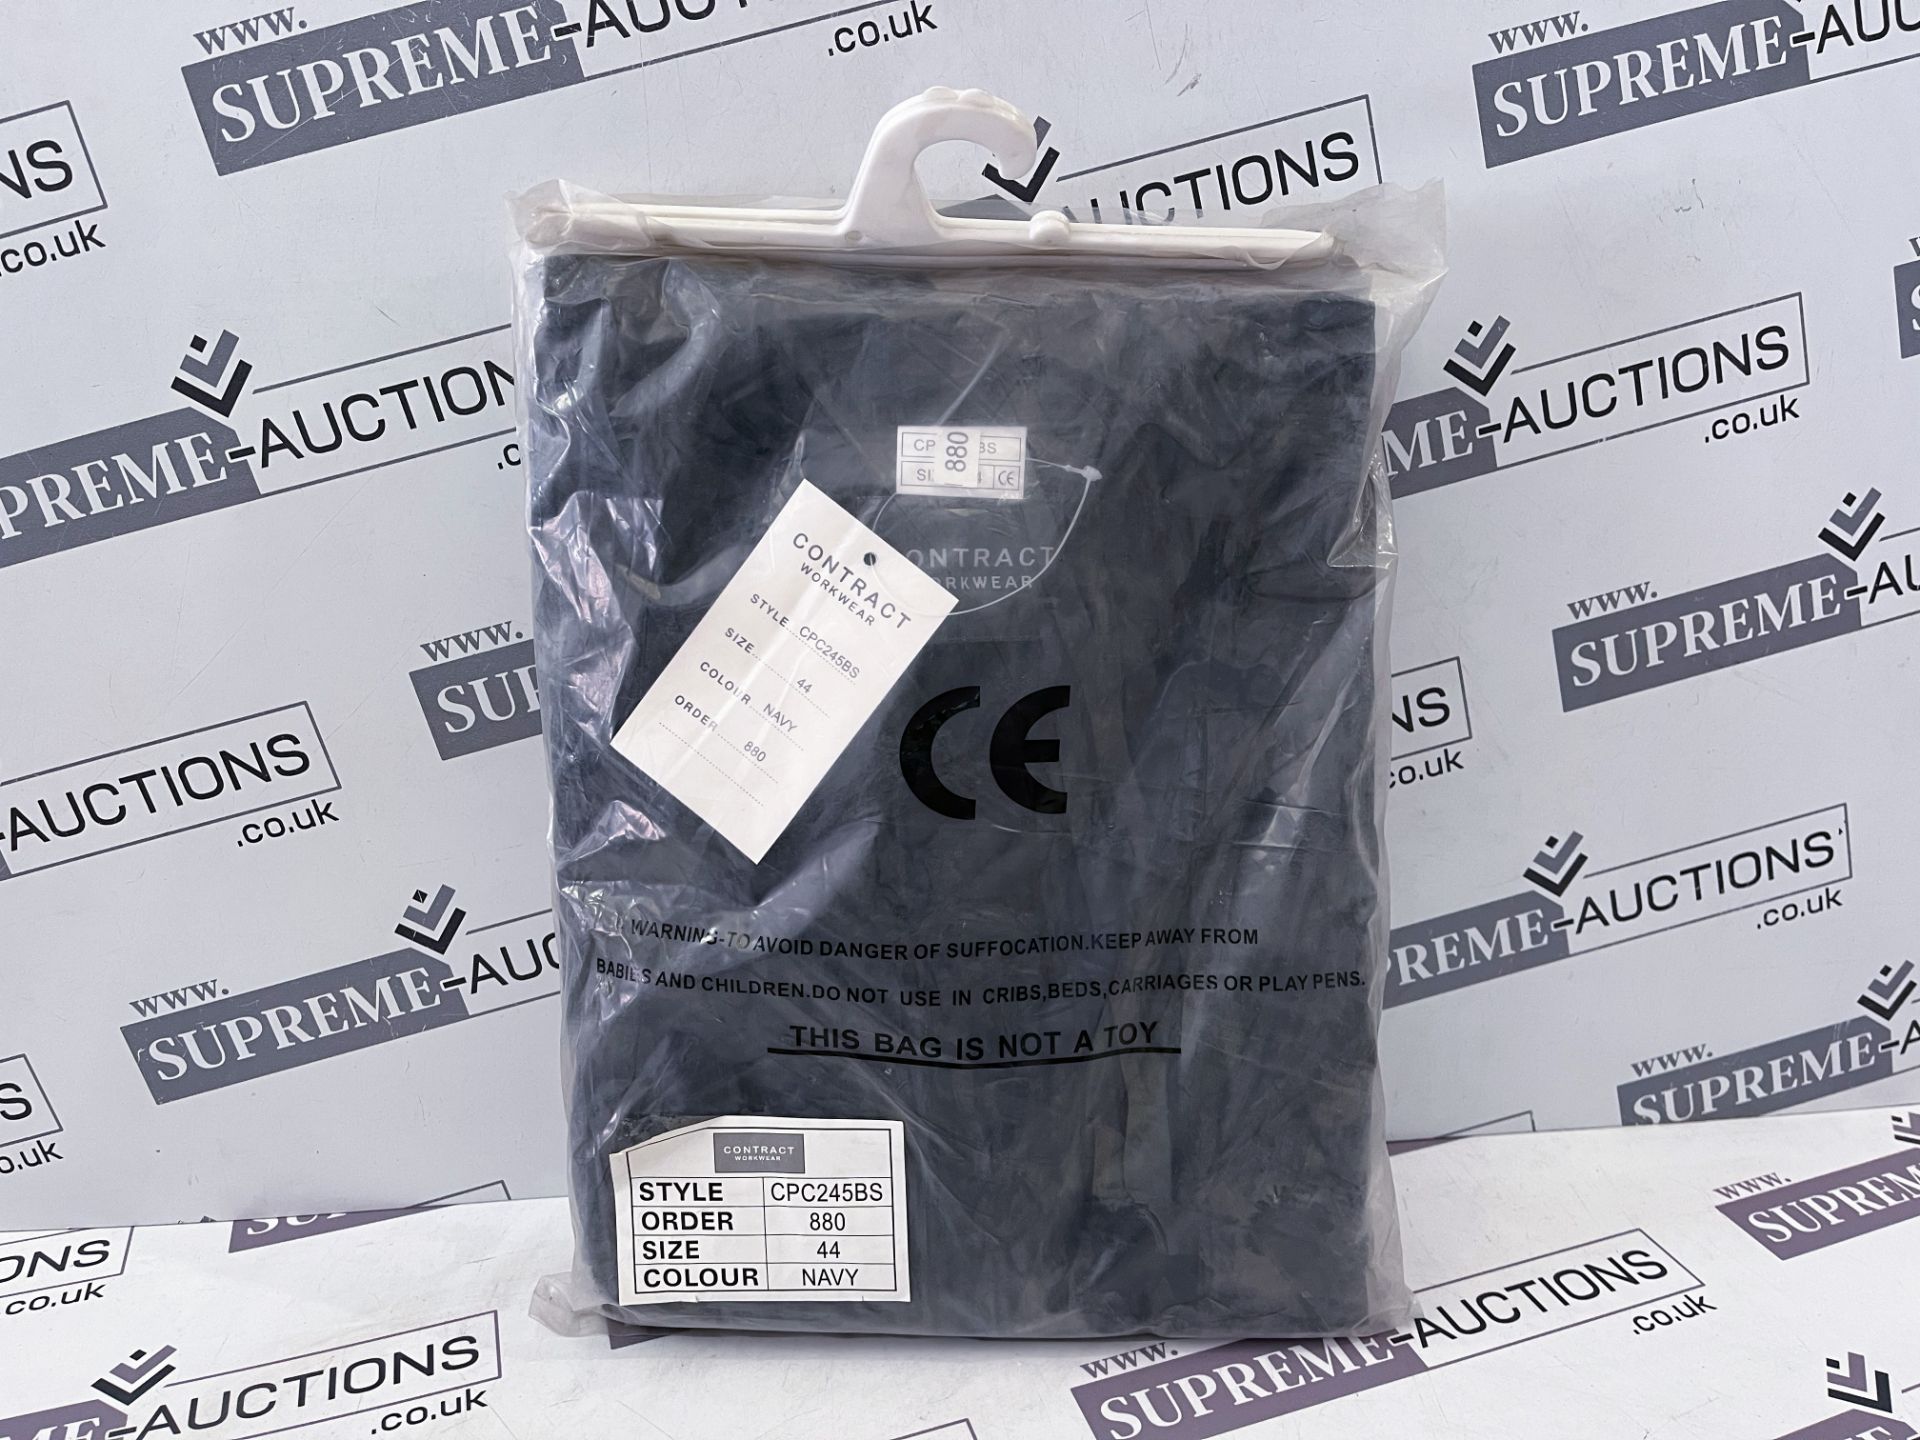 15 X BRAND NEW CONTRAST PROFESSIONAL BOILER SUITS (SIZES MAY VARY) S1-30